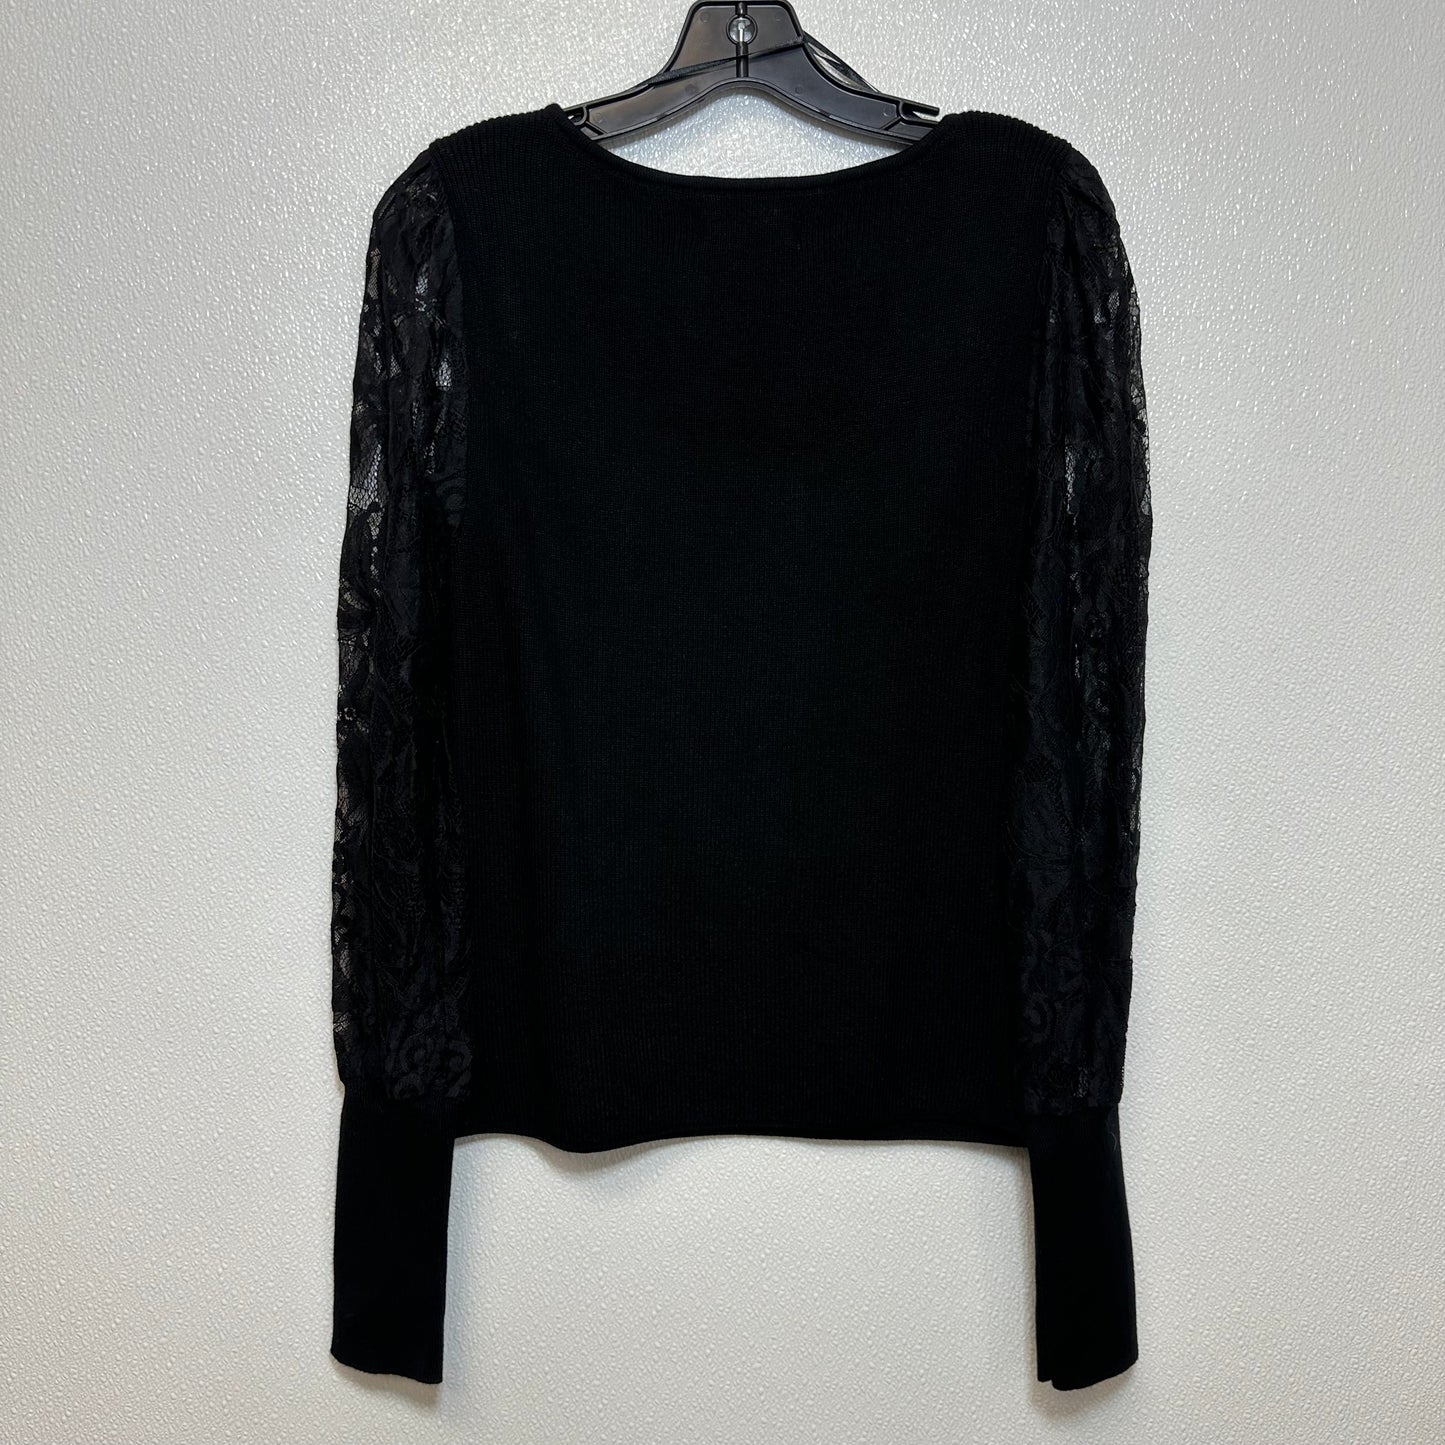 Top Long Sleeve By Anthropologie  Size: L